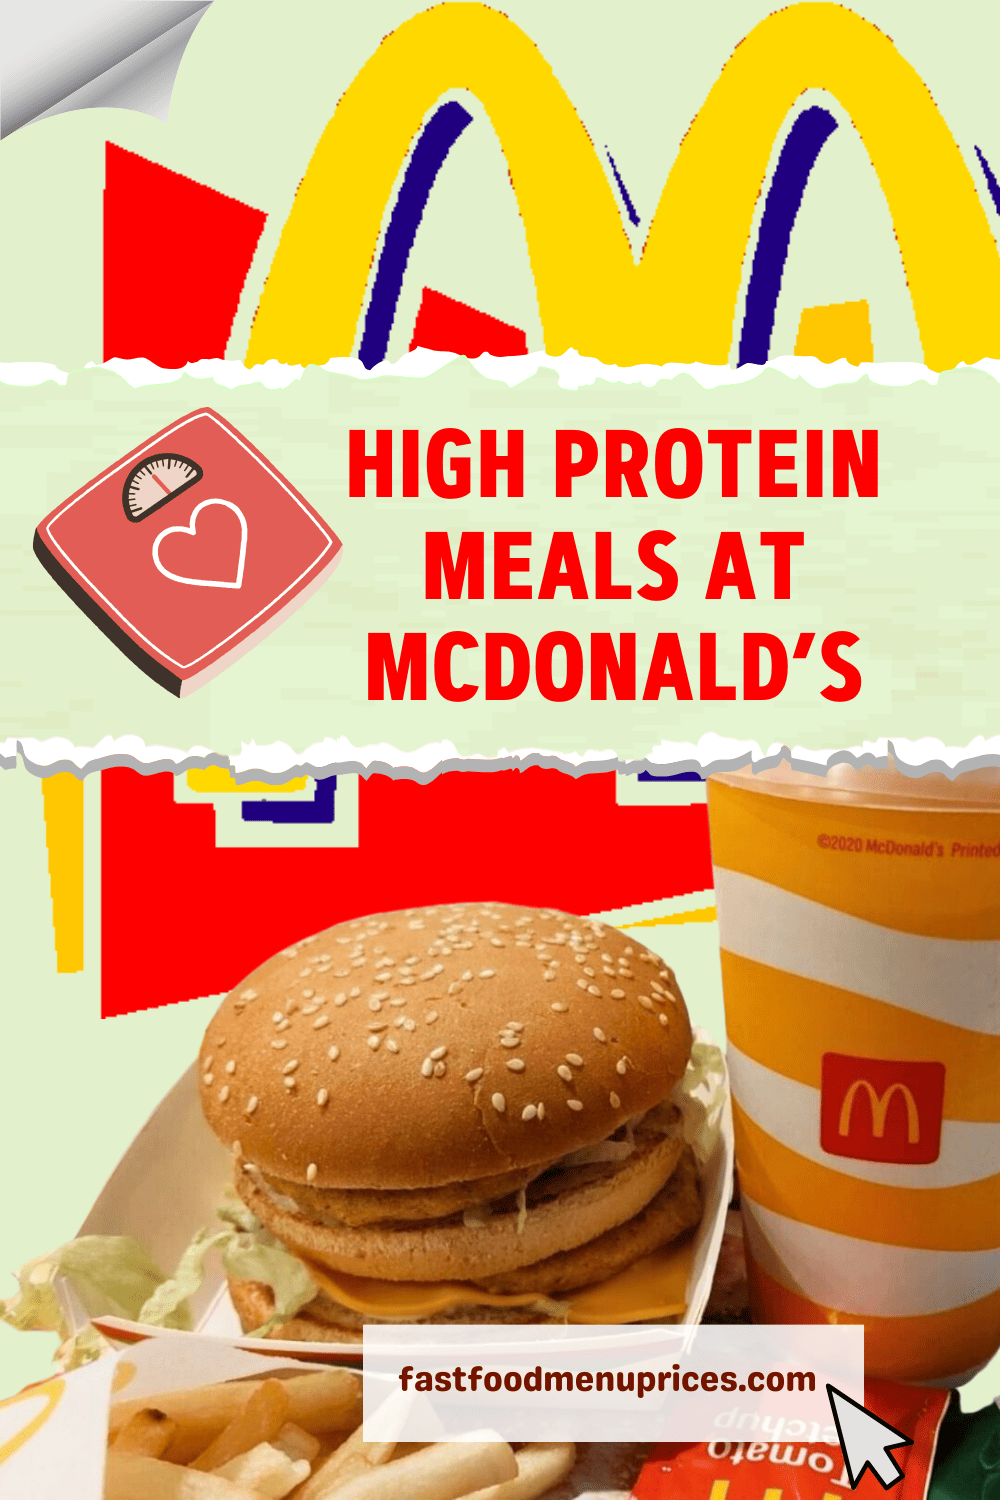 High protein meals at McDonald's combined with elements from Raising Cane's secret menu.